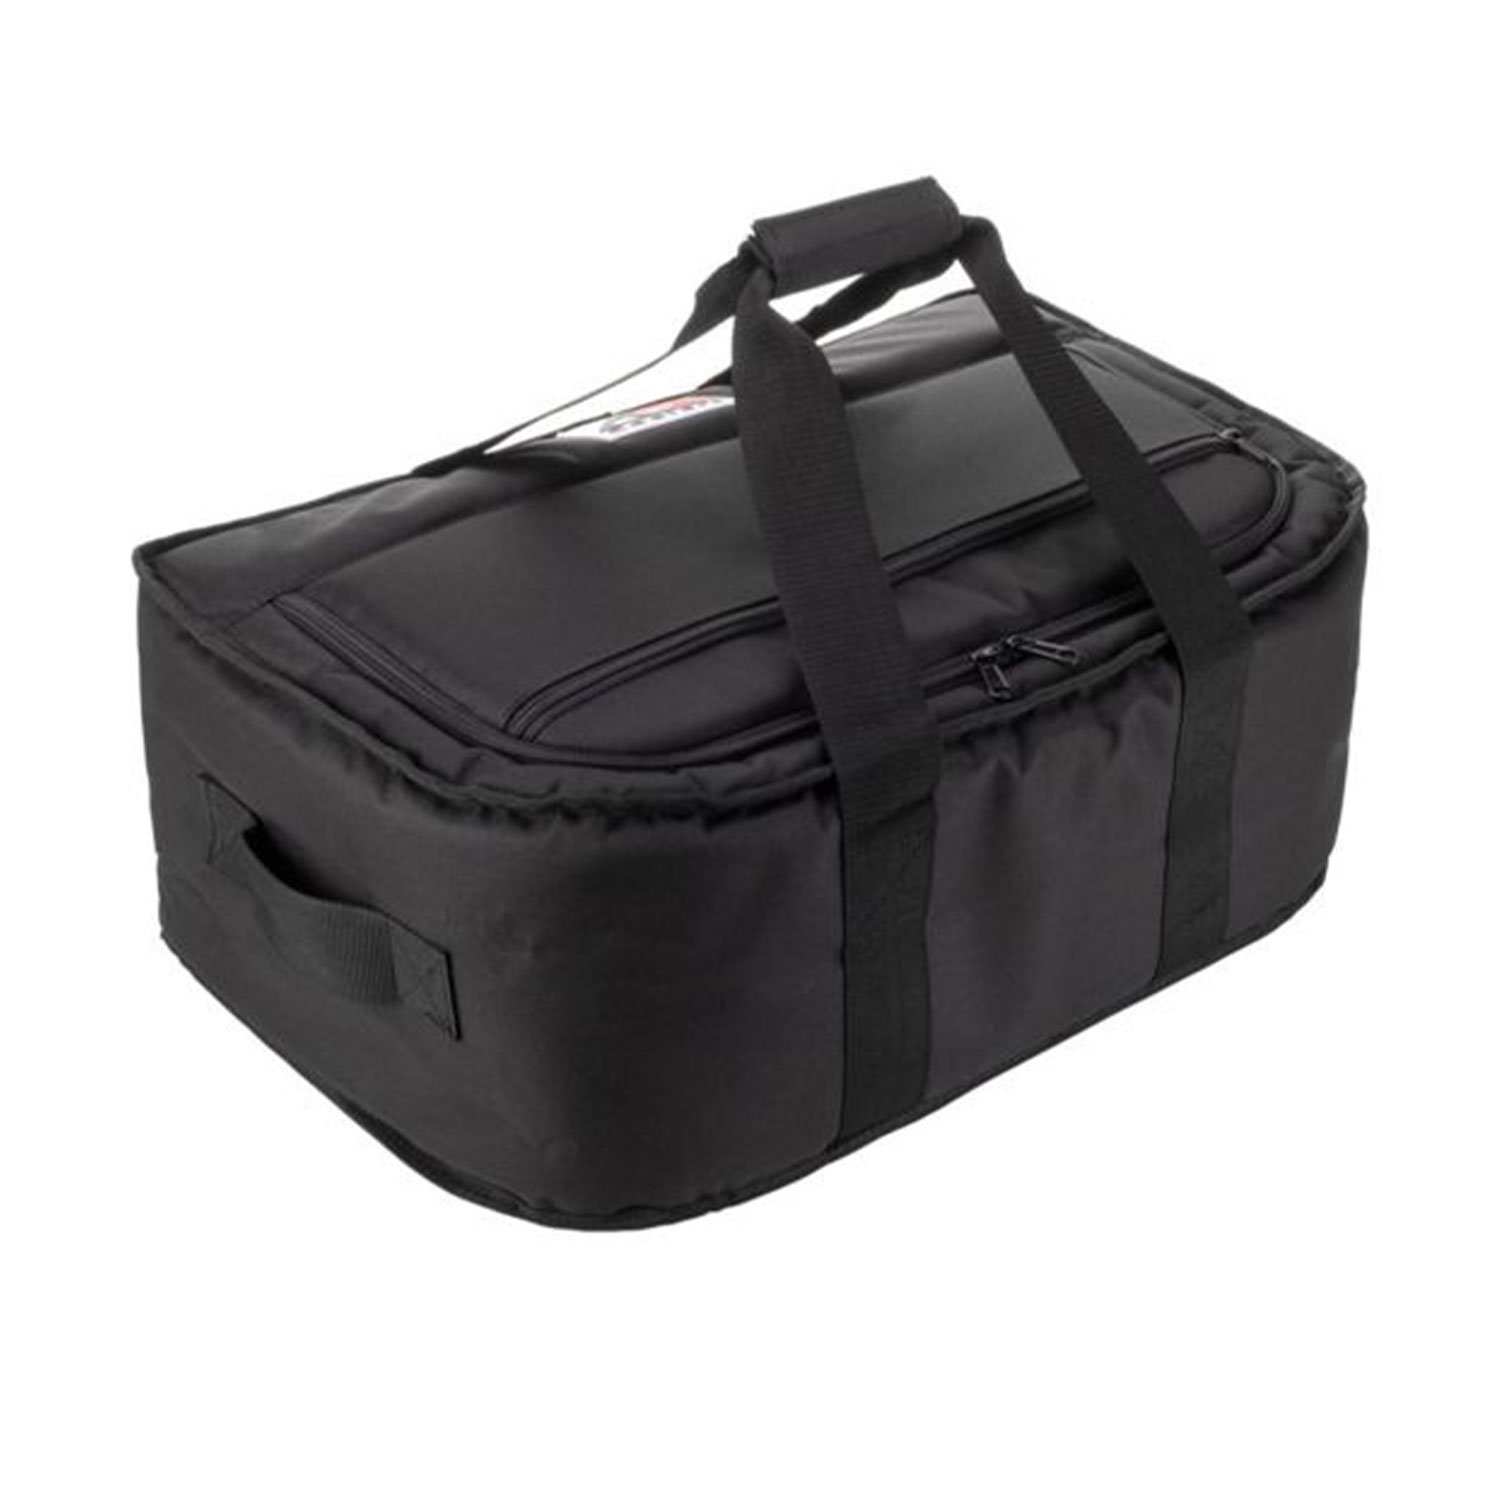 AO Coolers AOSNG38BK Stow-N-Go 38 Can Low Profile Portable Soft Cooler, Black - image 1 of 5